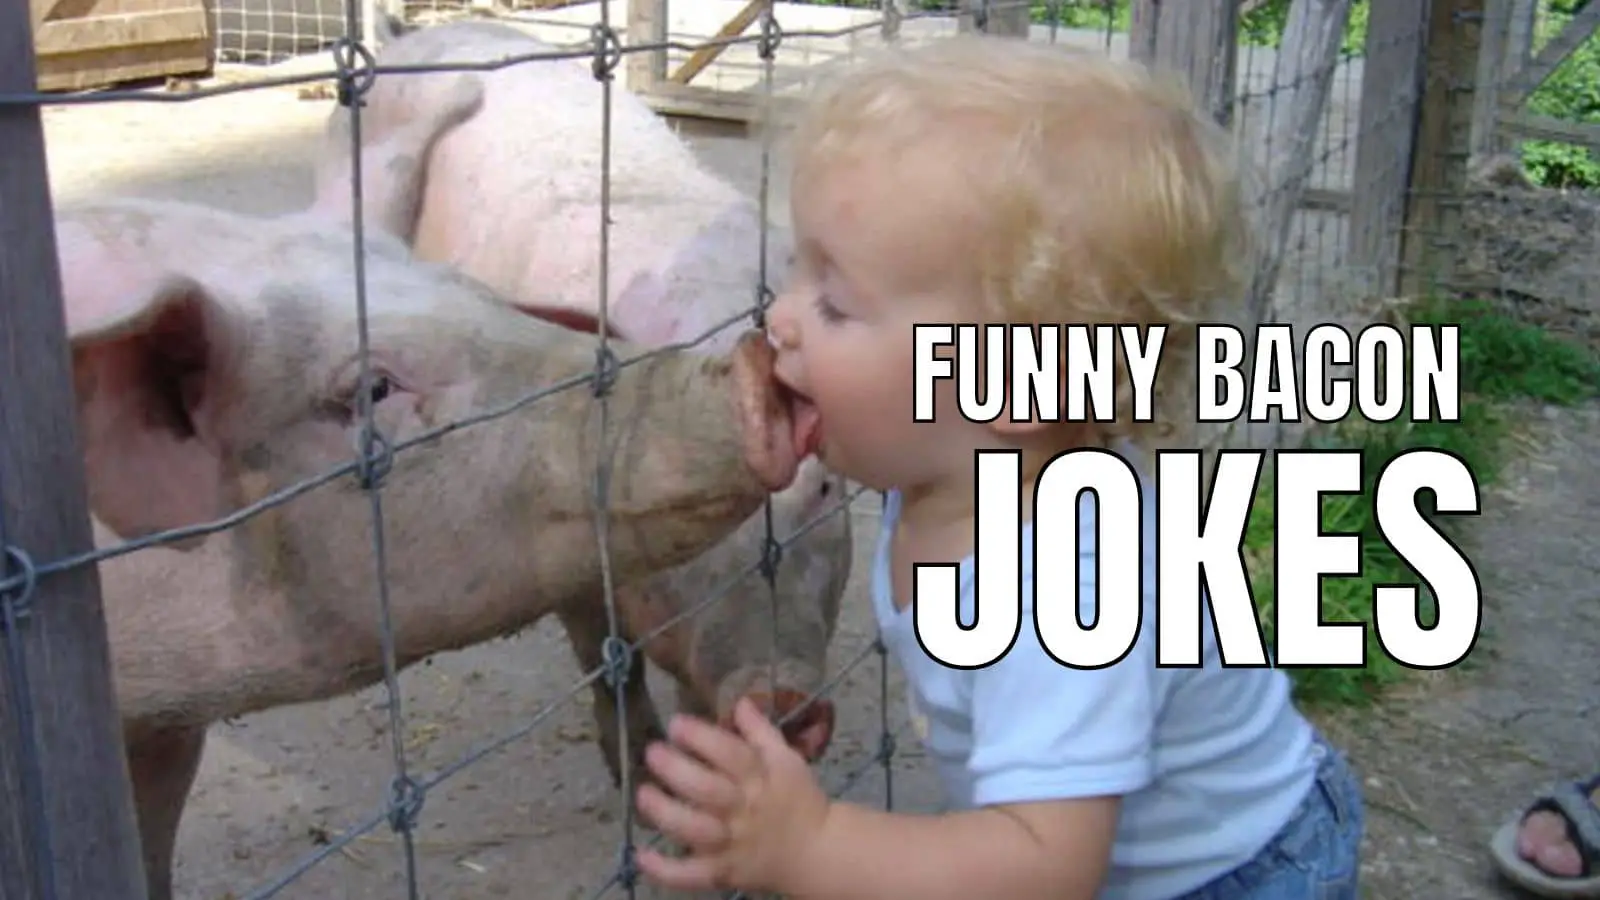 70 Funny Bacon Jokes And Puns That Everyone Will
Love